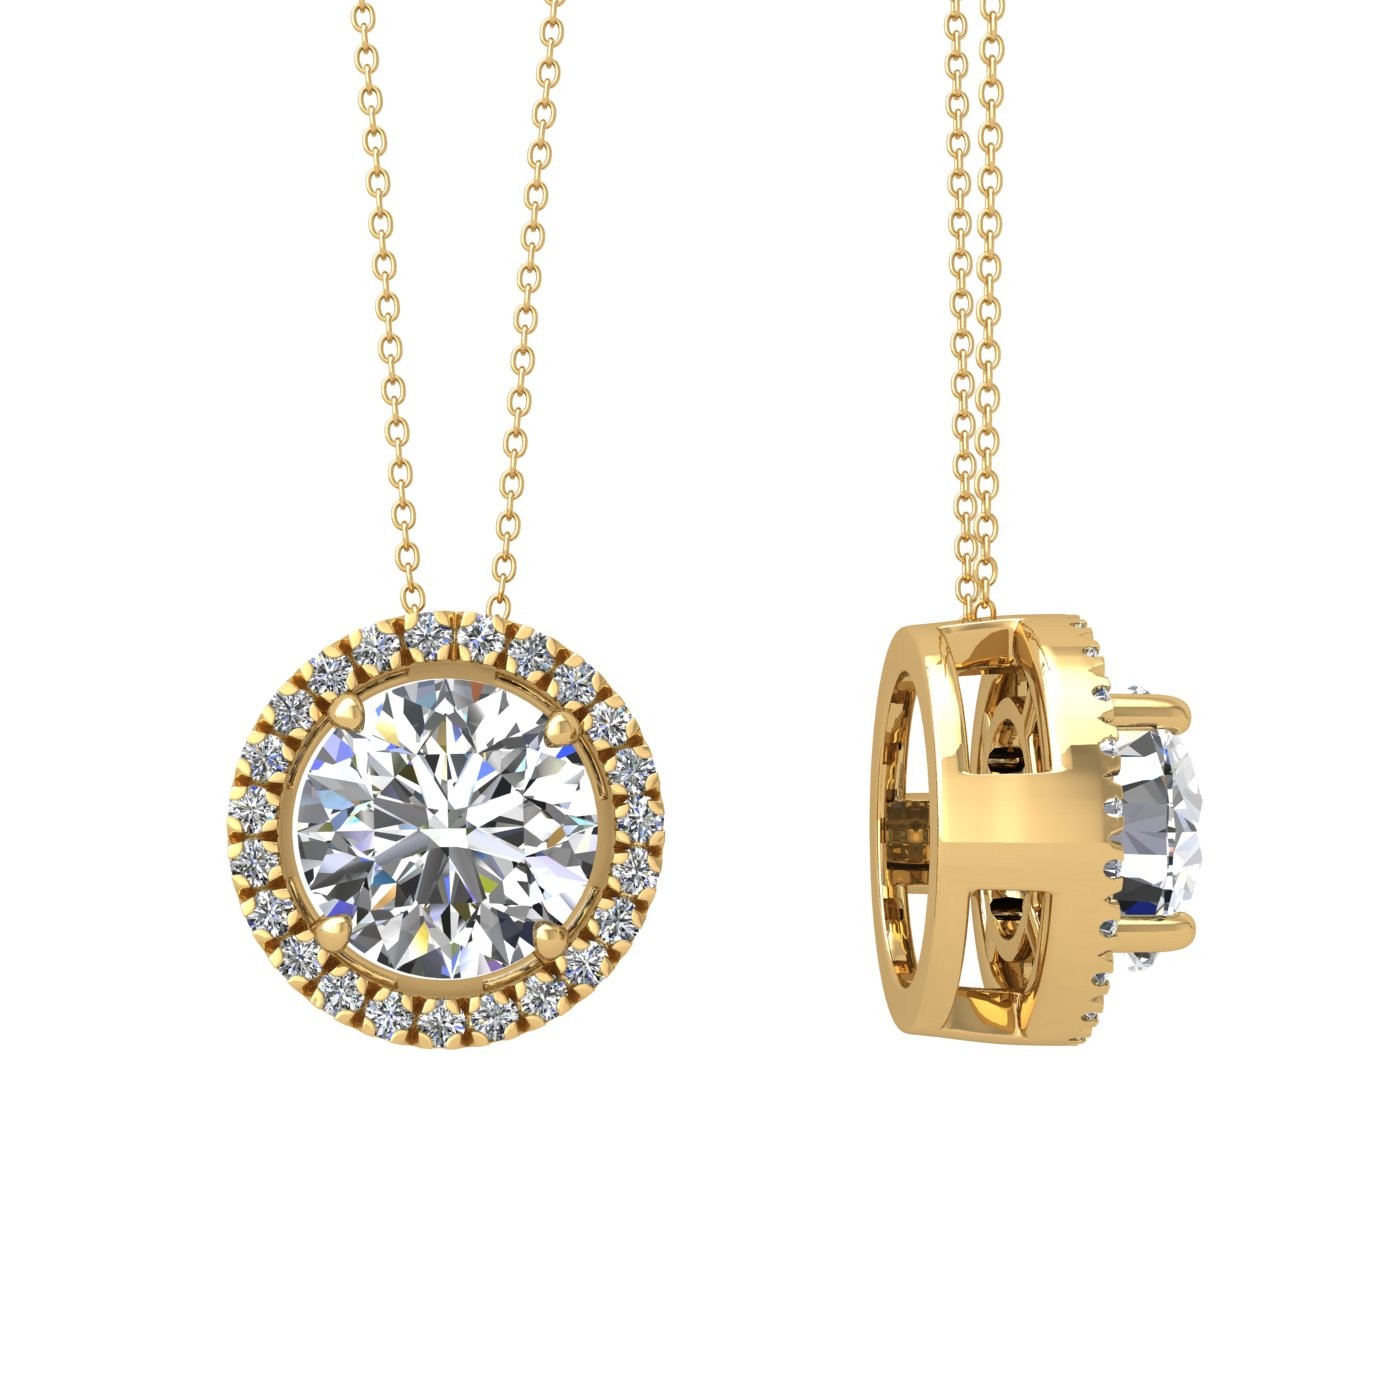 18k yellow gold 0,5 ct 4 prong round shape diamond pendant with diamond pavÉ set halo including chain seperate from the pendant Photos & images